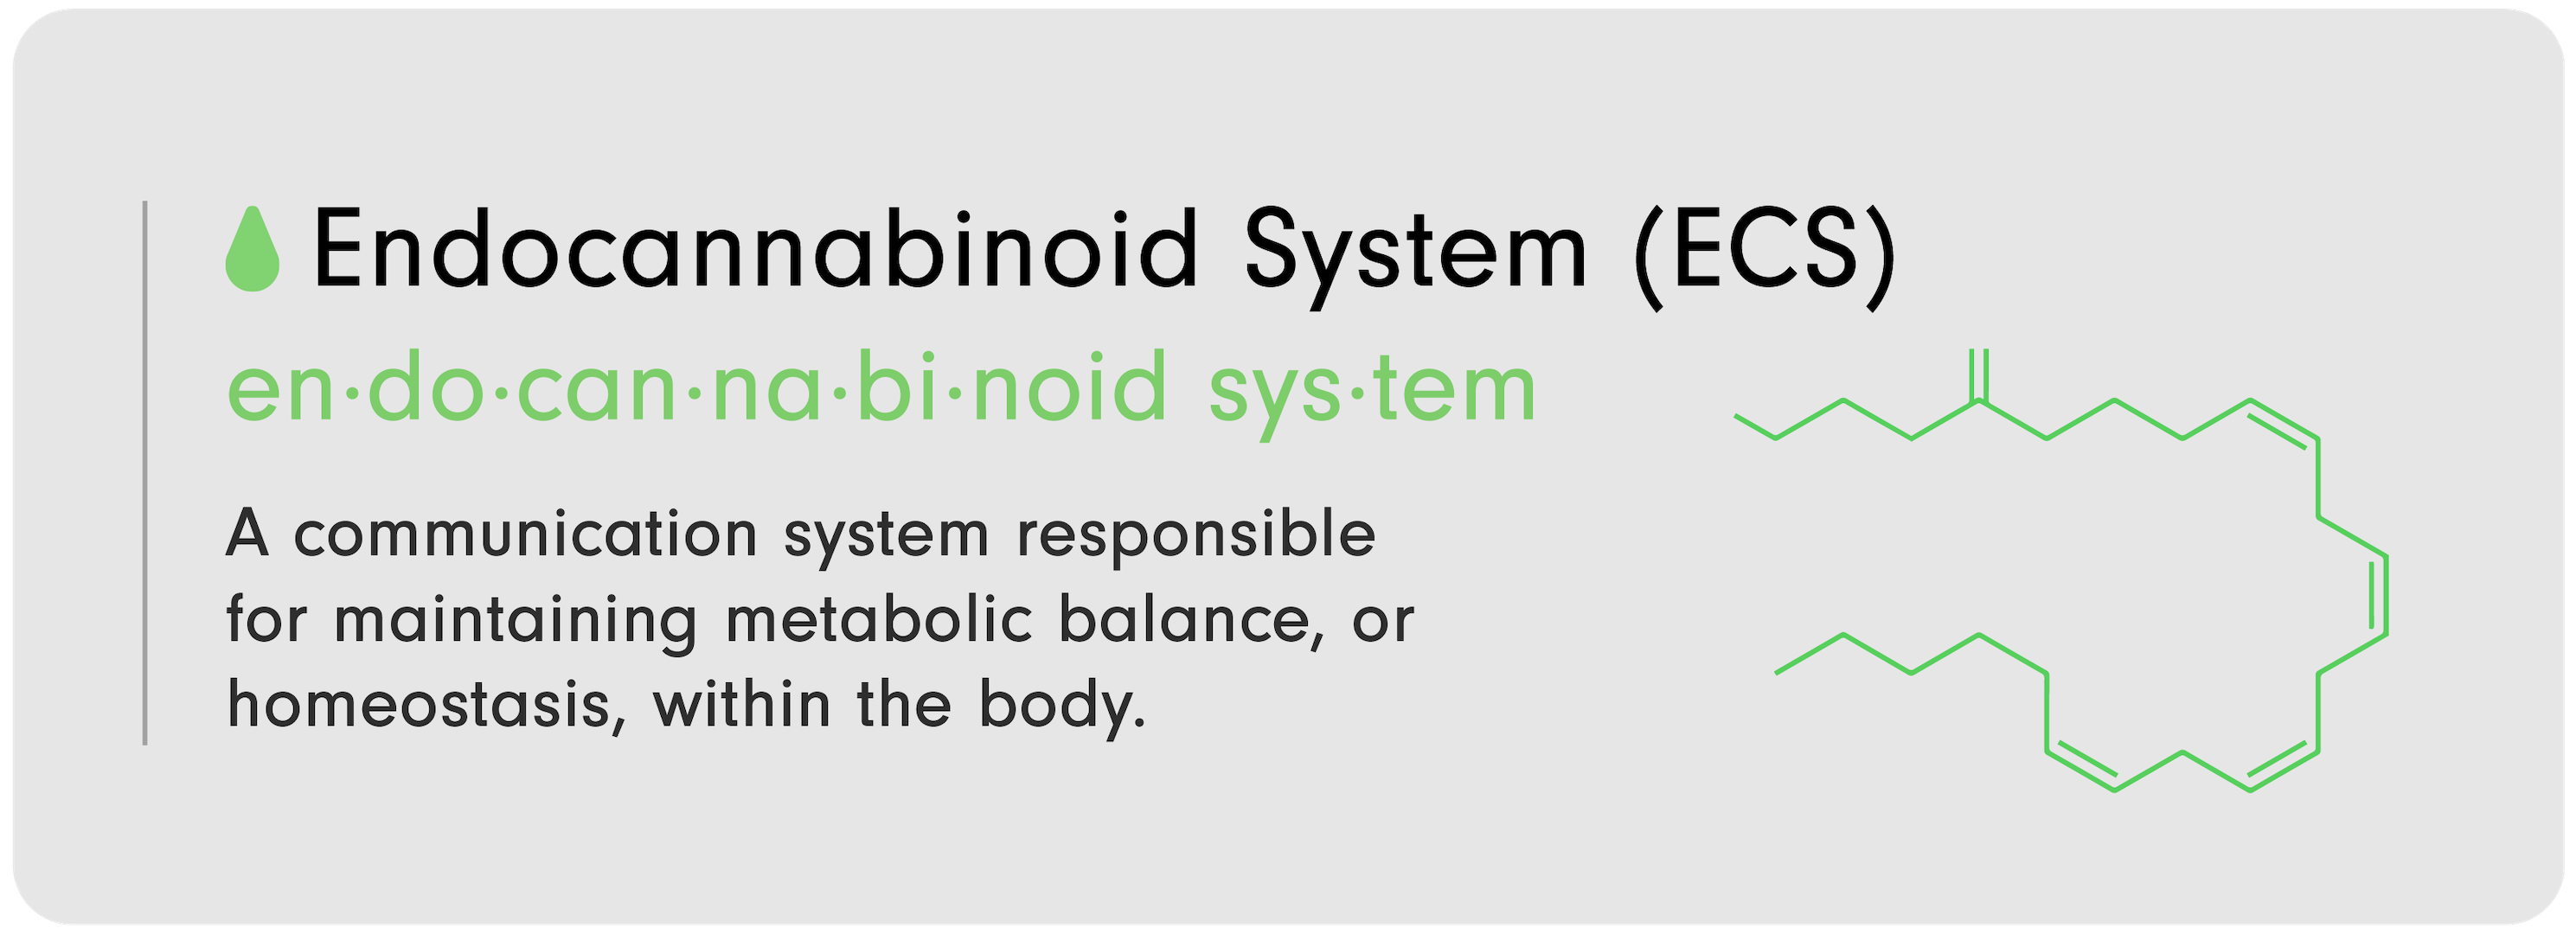 CBD 101 Infographic by LEVO that reads, "Endocannabinoid System (ECS): A communication system responsible for maintaining metabolic balance, or homeostasis, within the body."